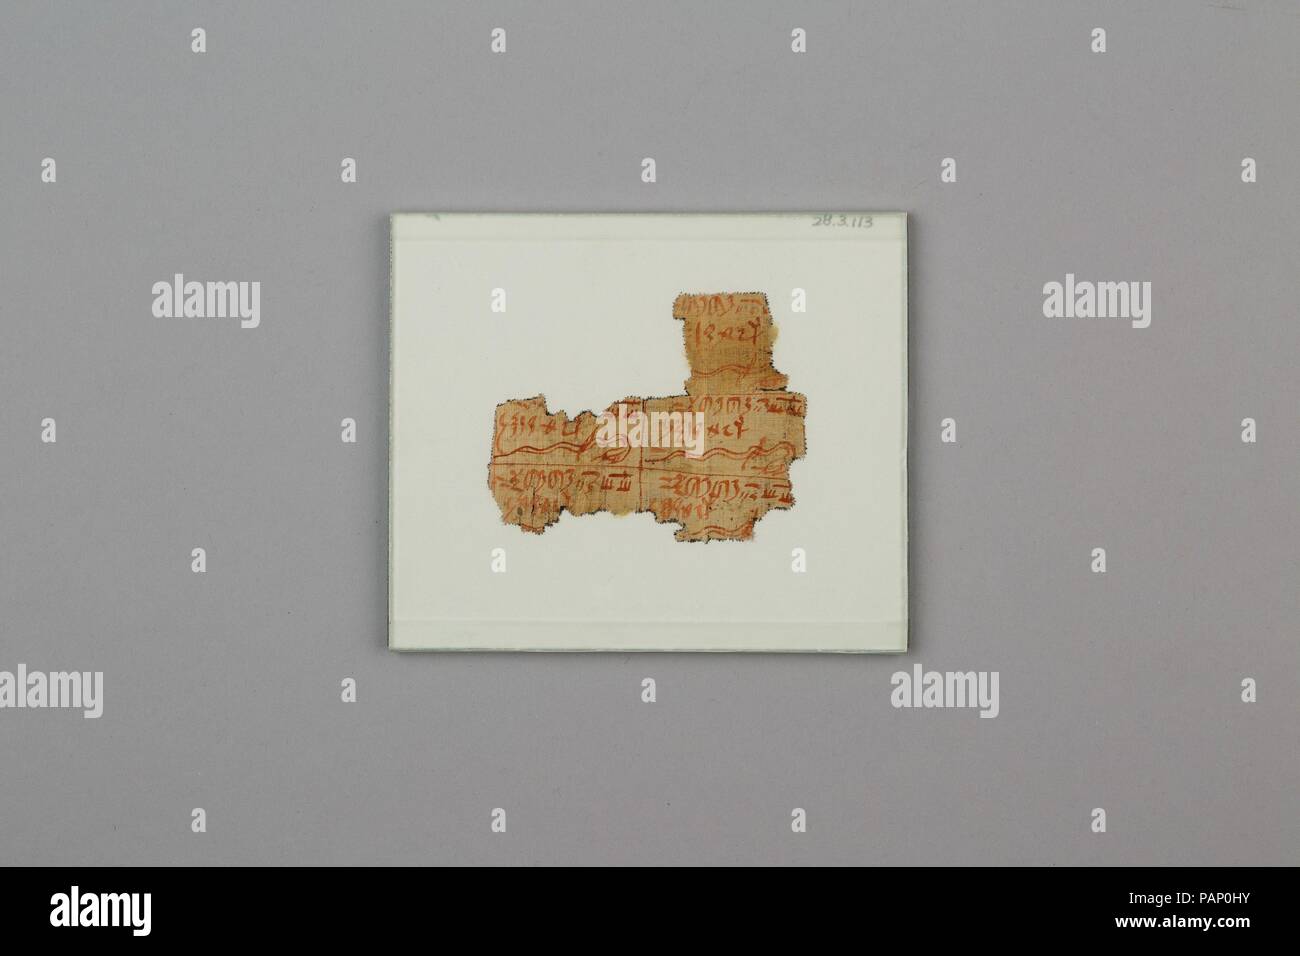 Fragment of Magical Papyrus. Dimensions: L. 7.5 × W. 6 cm (2 15/16 × 2 3/8 in.). Dynasty: Dynasty 25-26. Date: ca. 712-525 B.C.. Museum: Metropolitan Museum of Art, New York, USA. Stock Photo